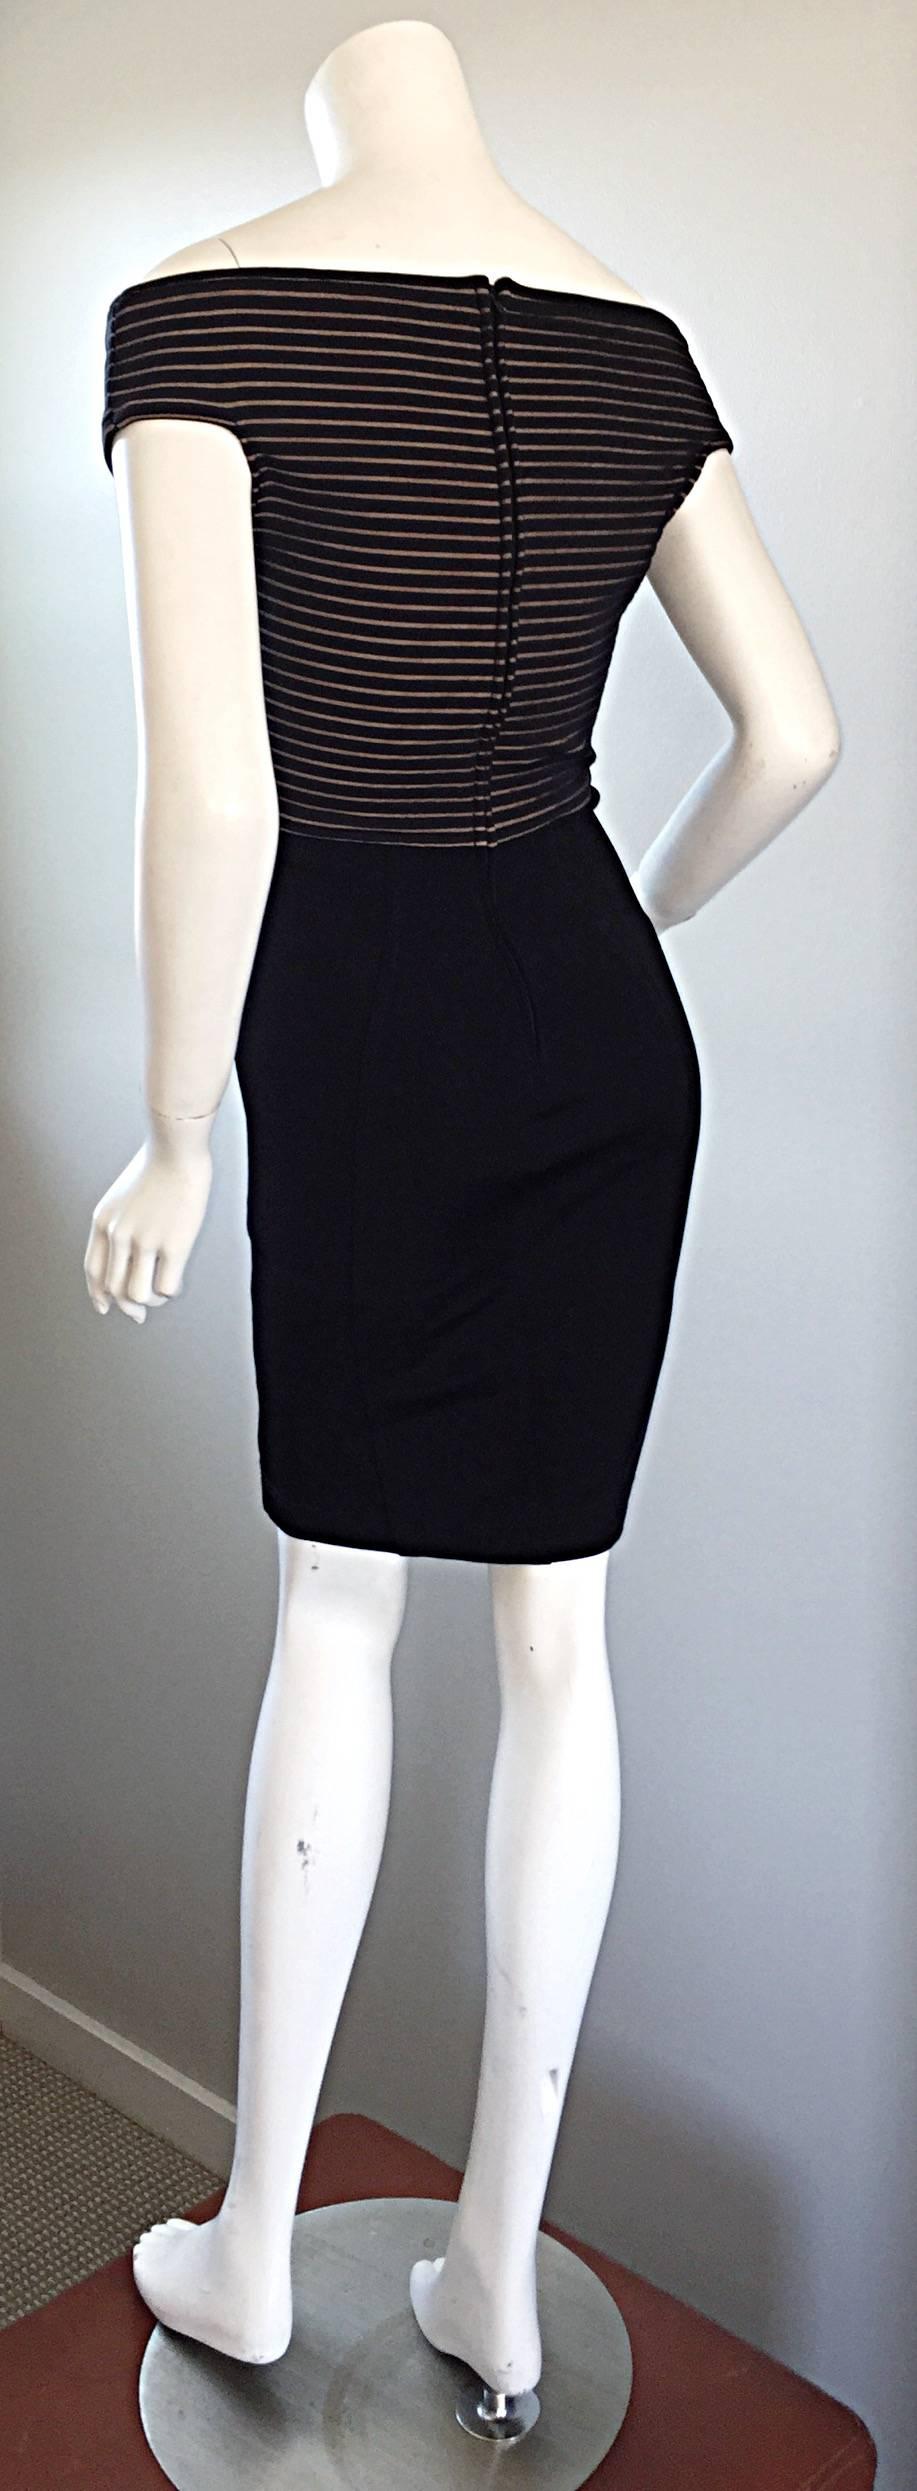 Sexy 1990s Tadashi Shoji dress! Black stretch that hugs the body in all the right places! Black, with nude peeks of fabric in between at the bust, which evokes just the right amount of sex appeal! Sits slightly off the shoulders. This is SUCH a